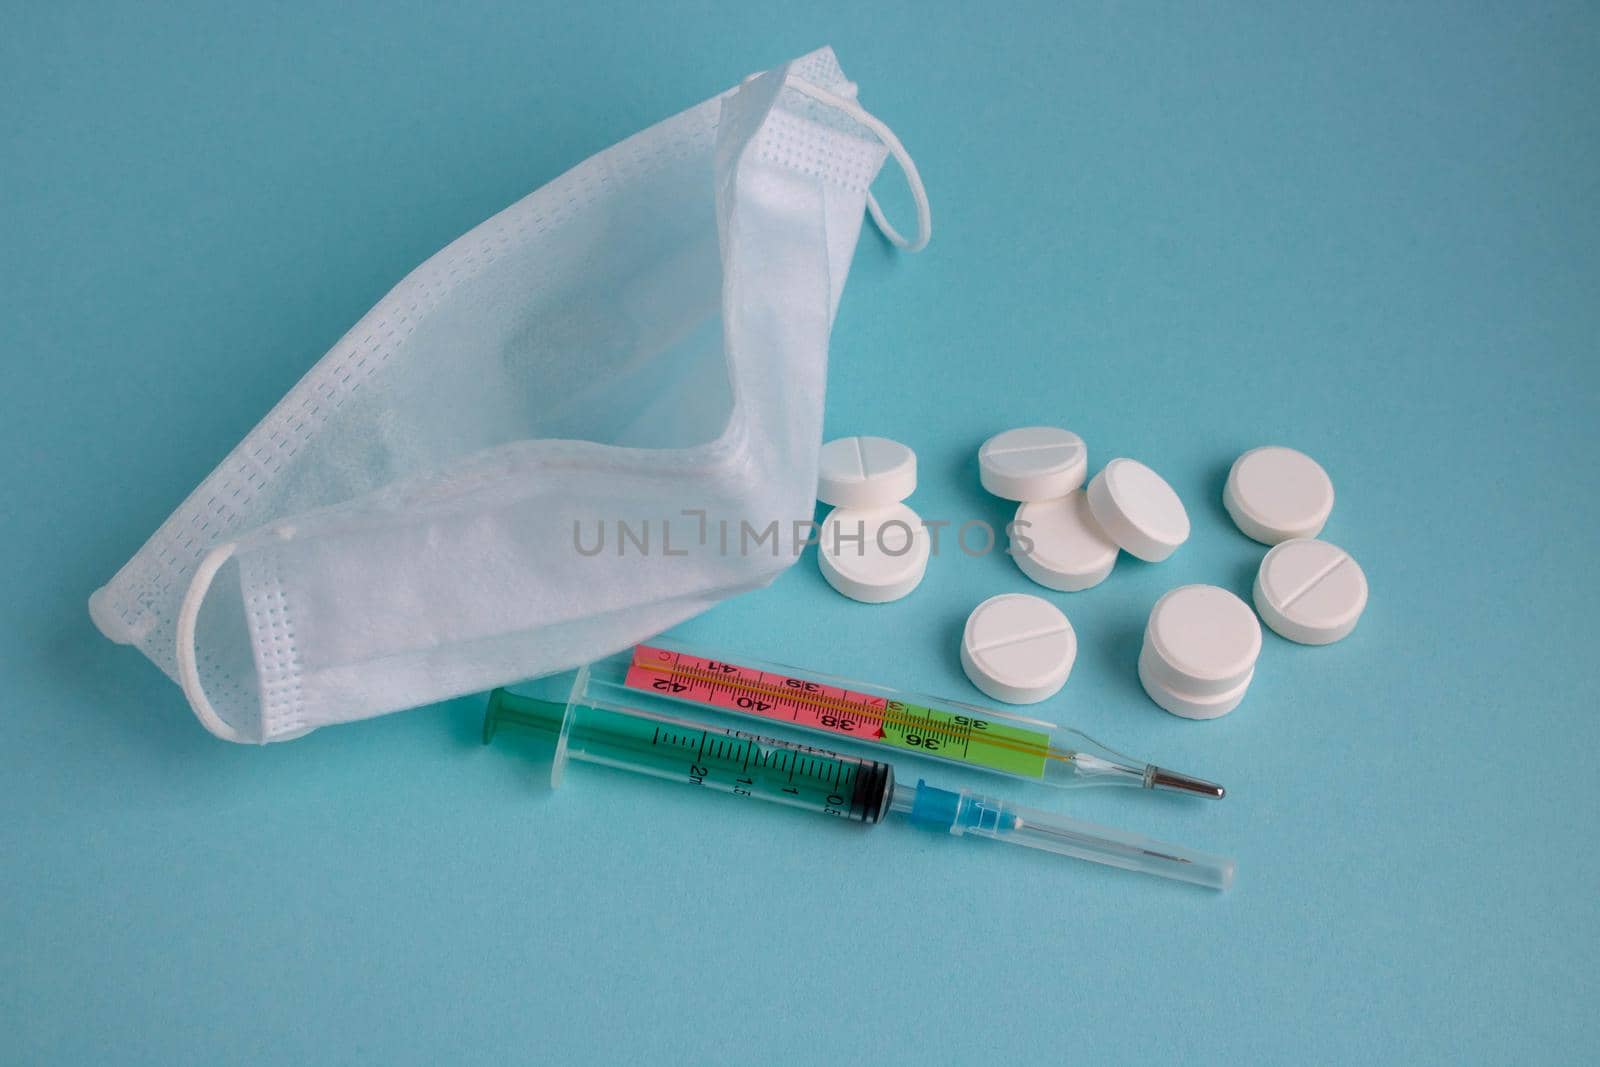 anti-virus medical supplies. concept of deadly coronavirus epidemic. thermometer, mask, syringe with vaccine and antibiotic pills.